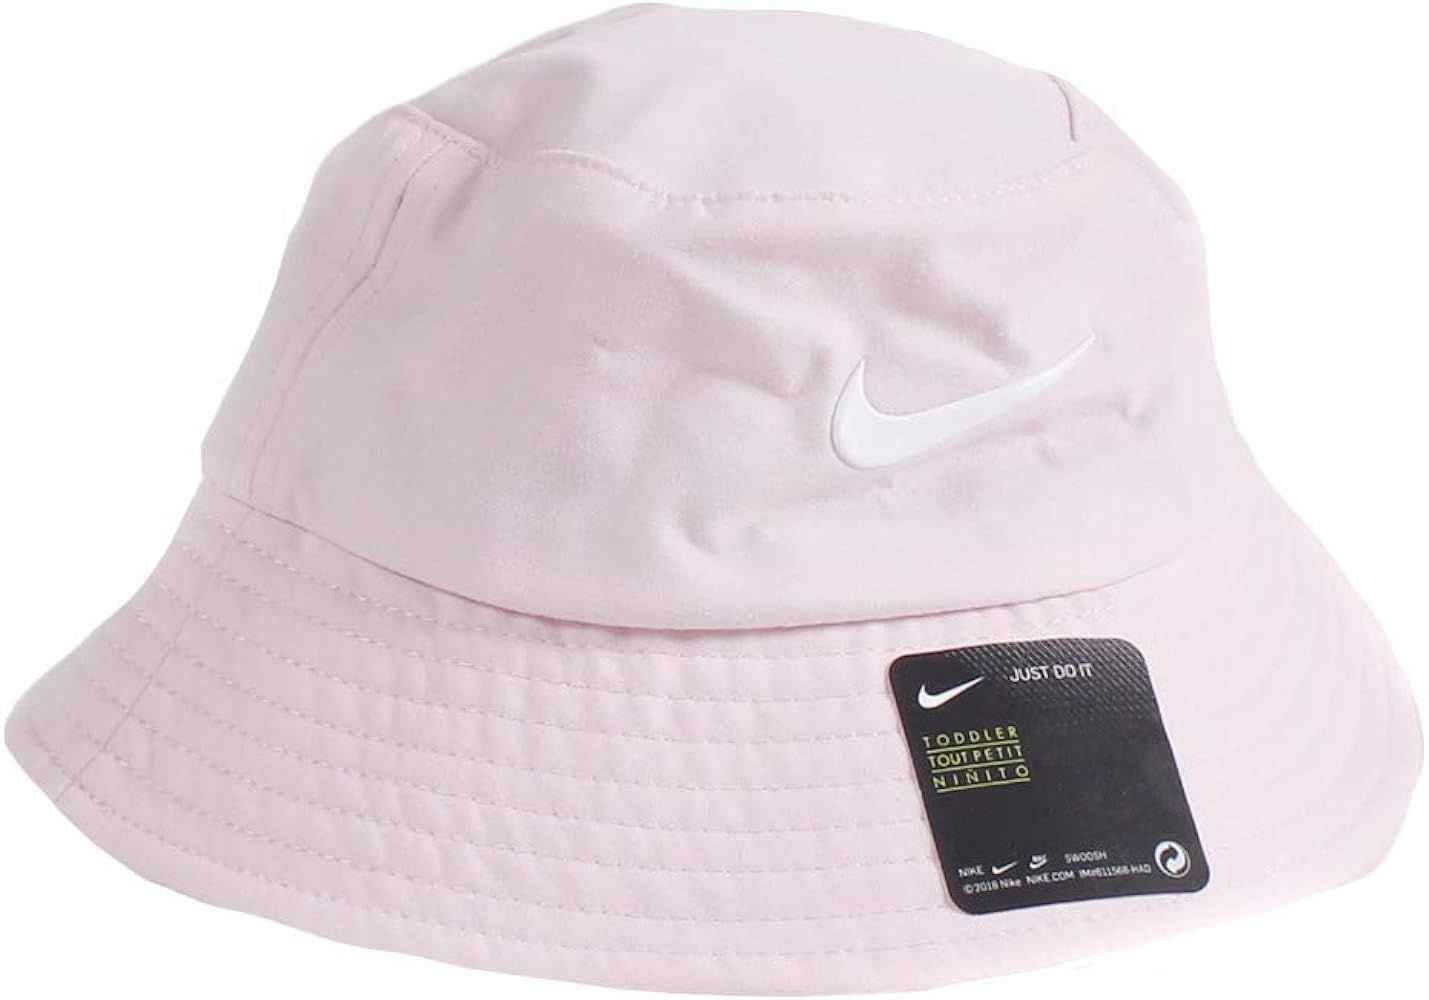 Nike Dry Infant/Toddler Girls' Bucket Hat (Pink(6A2682-A9Y)/White, 2-4T) | Amazon (US)